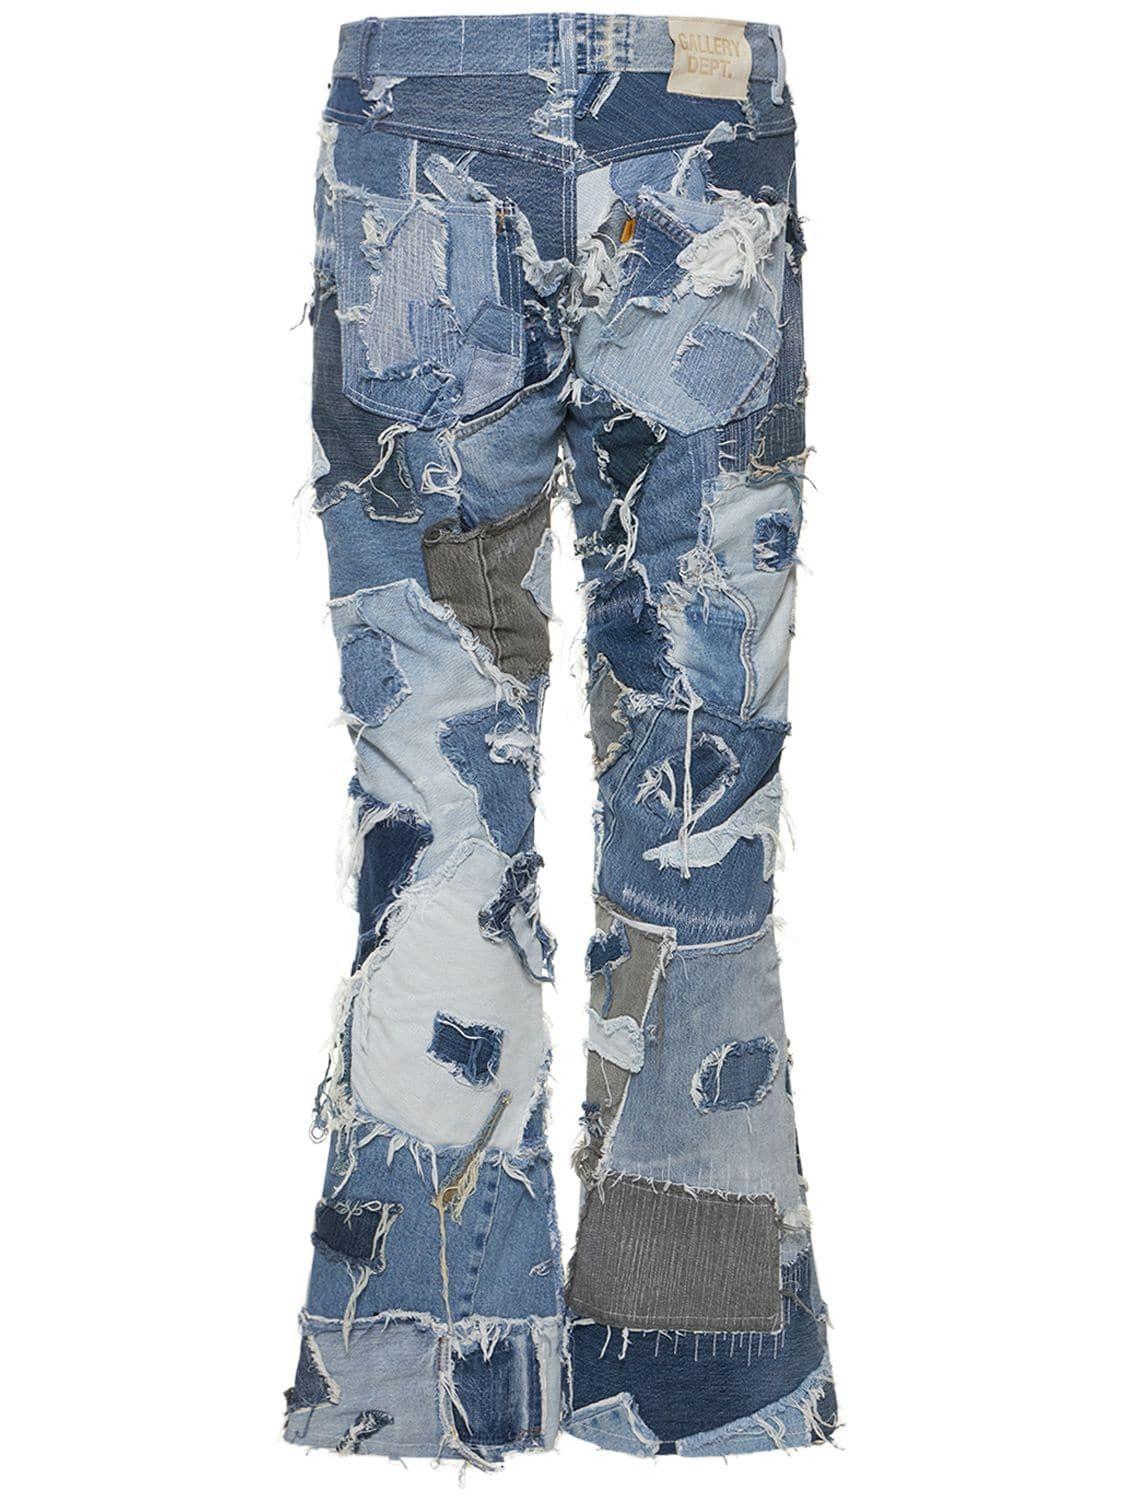 RYDCOT Womens Denim Bootcut Pants with Pockets Floral Printed Flare Jeans  Mid Rise Thin Stretch Pants Trousers Womens Fashion Pants 2023 Trendy Sale  - Walmart.com